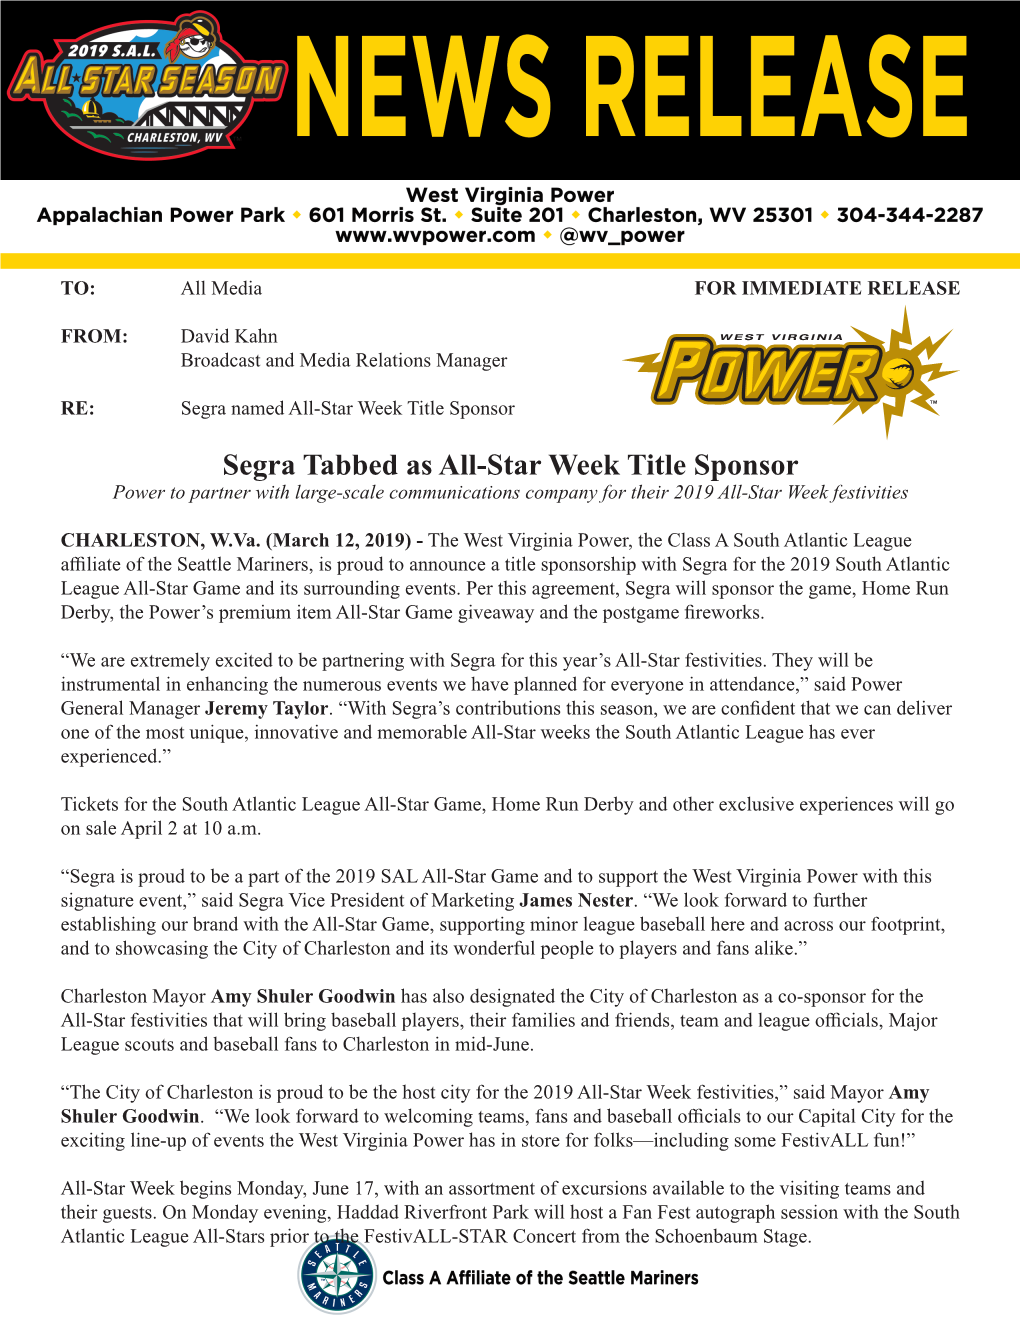 Segra Tabbed As All-Star Week Title Sponsor Power to Partner with Large-Scale Communications Company for Their 2019 All-Star Week Festivities